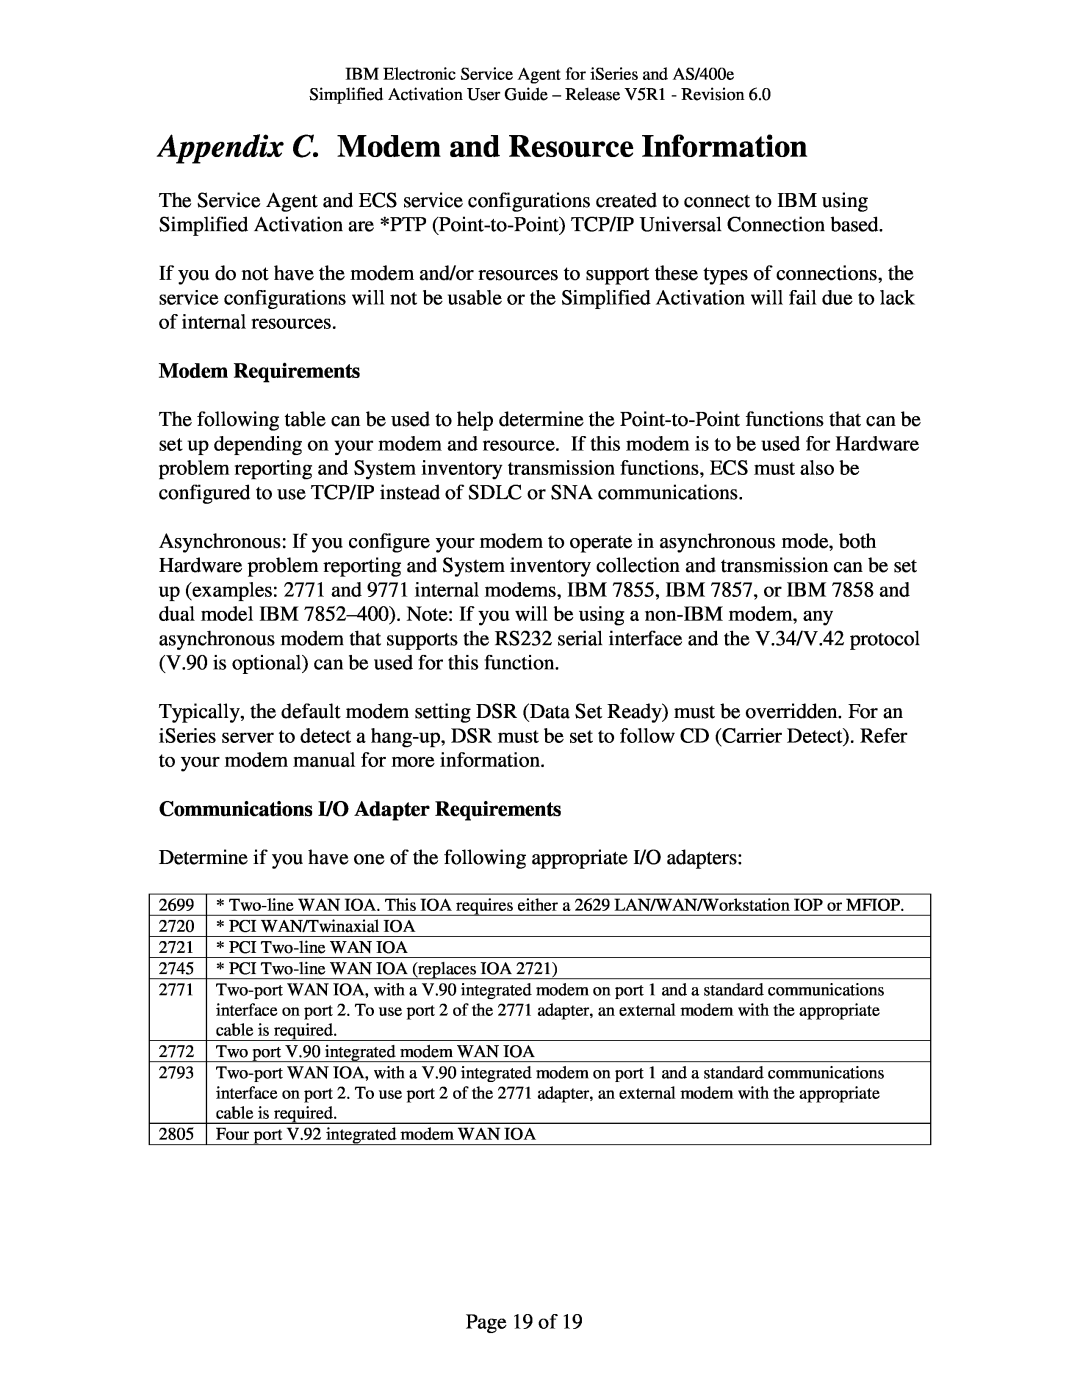 IBM V5R1, iSeries Appendix C. Modem and Resource Information, Modem Requirements, Communications I/O Adapter Requirements 